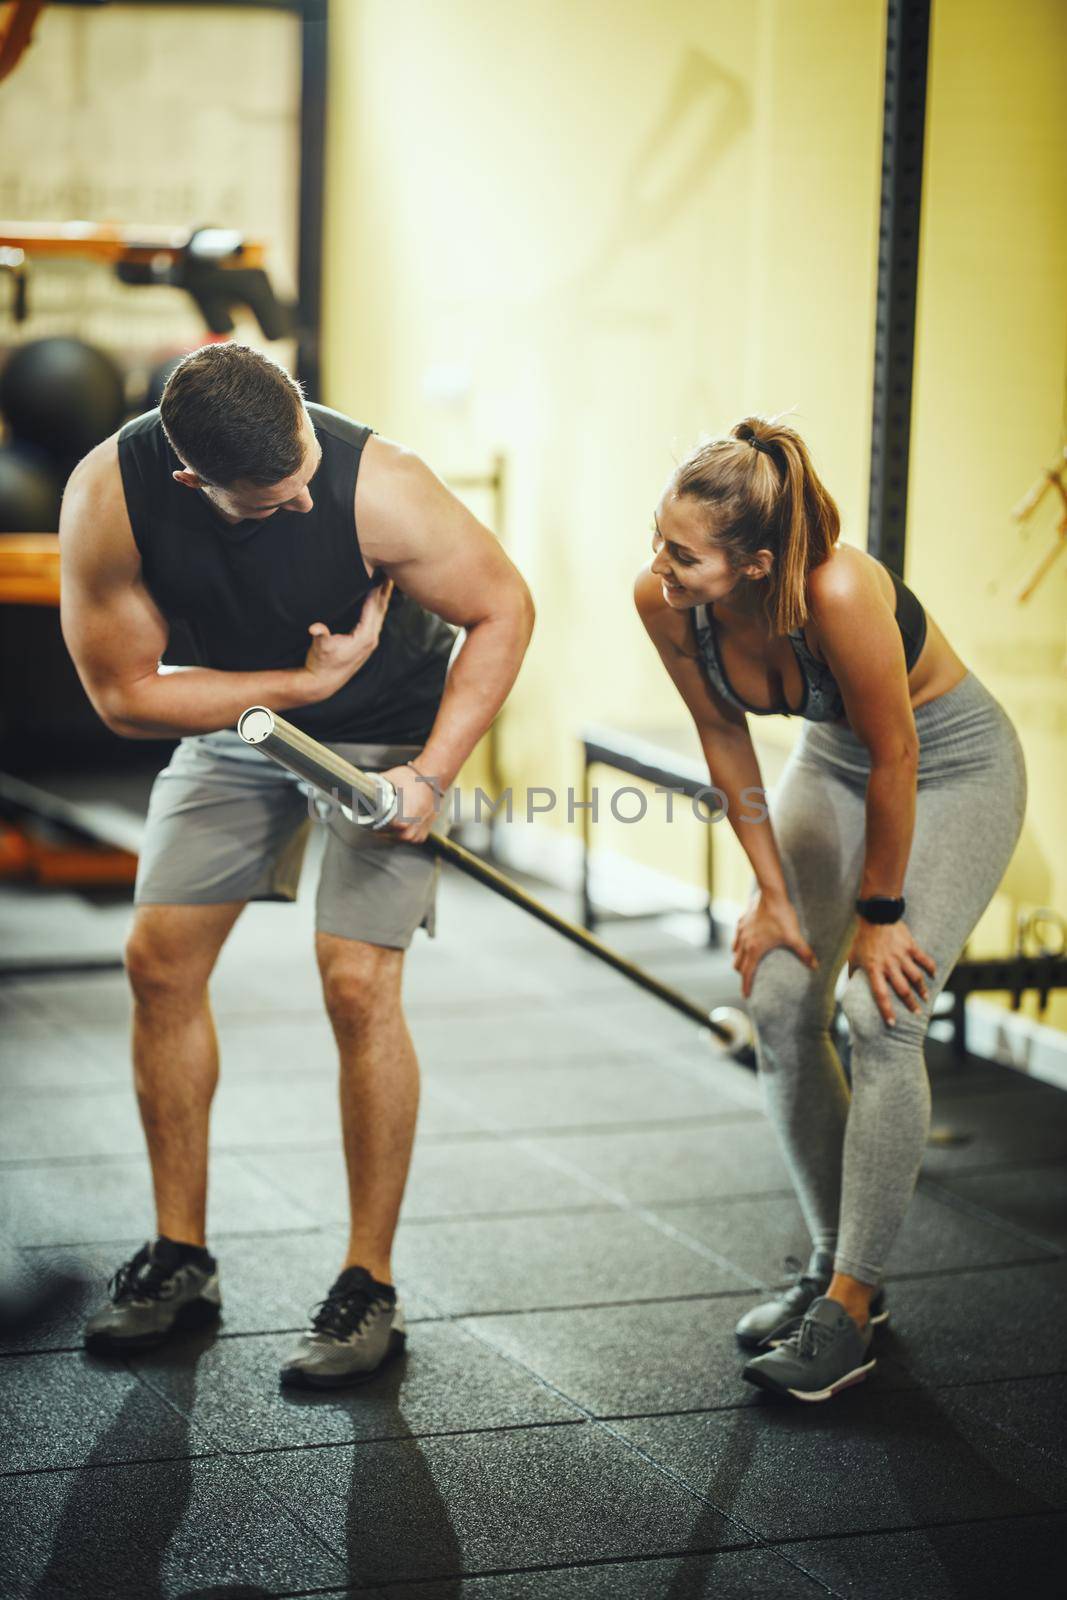 Shot of an attractive young woman working out with personal trainer at the gym.